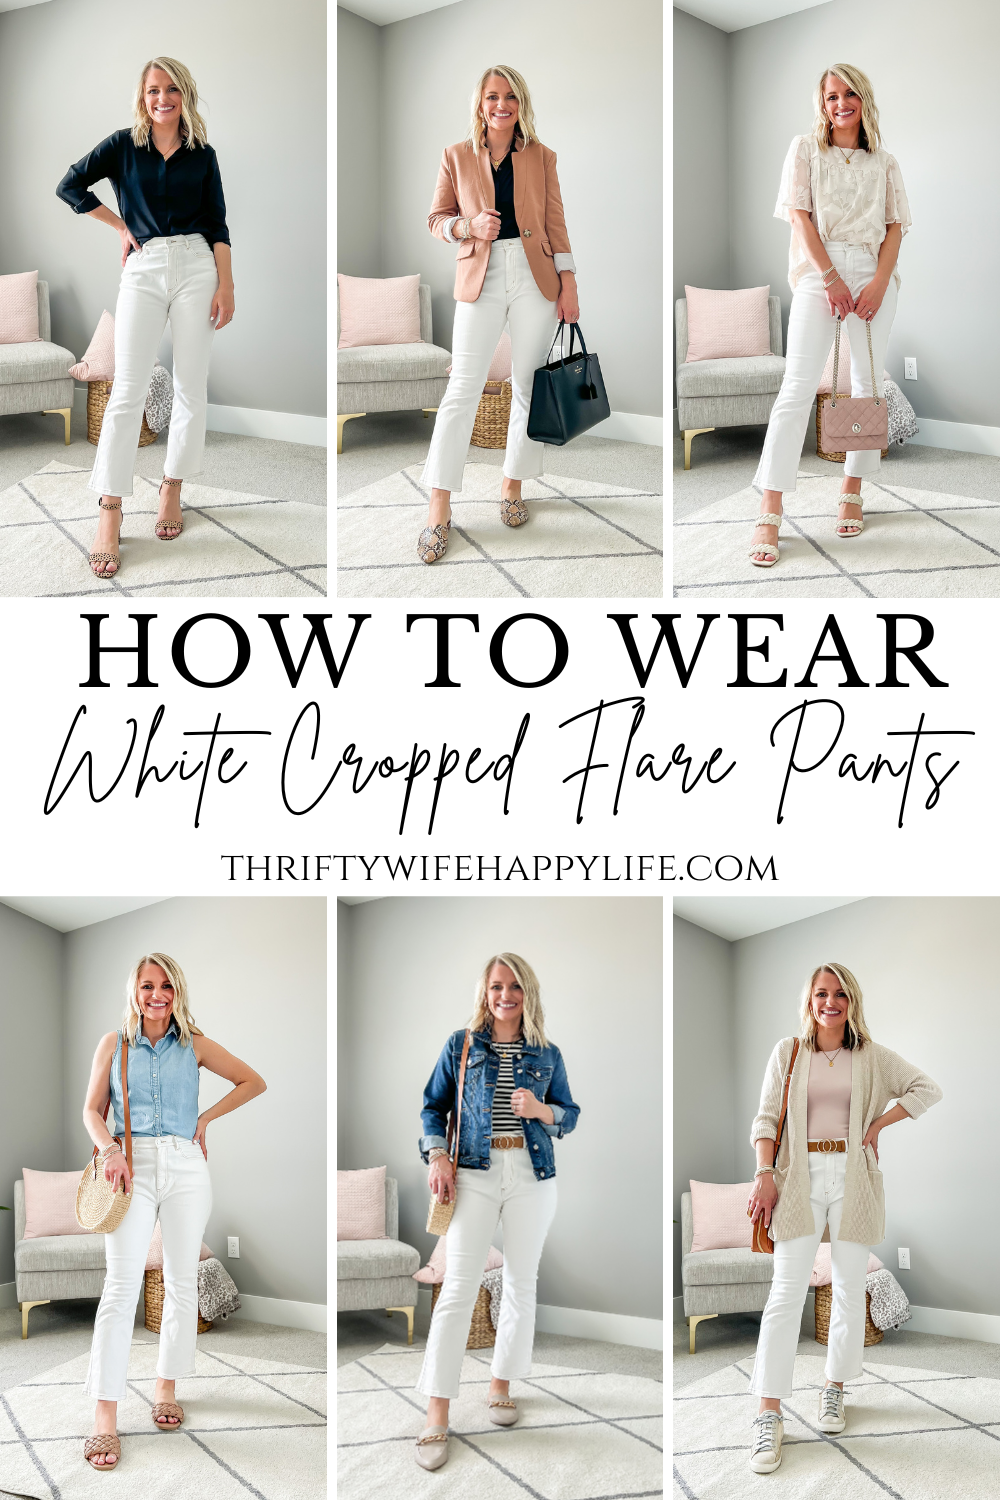 How to Wear White Cropped Flare Pants for Spring - Thrifty Wife Happy Life